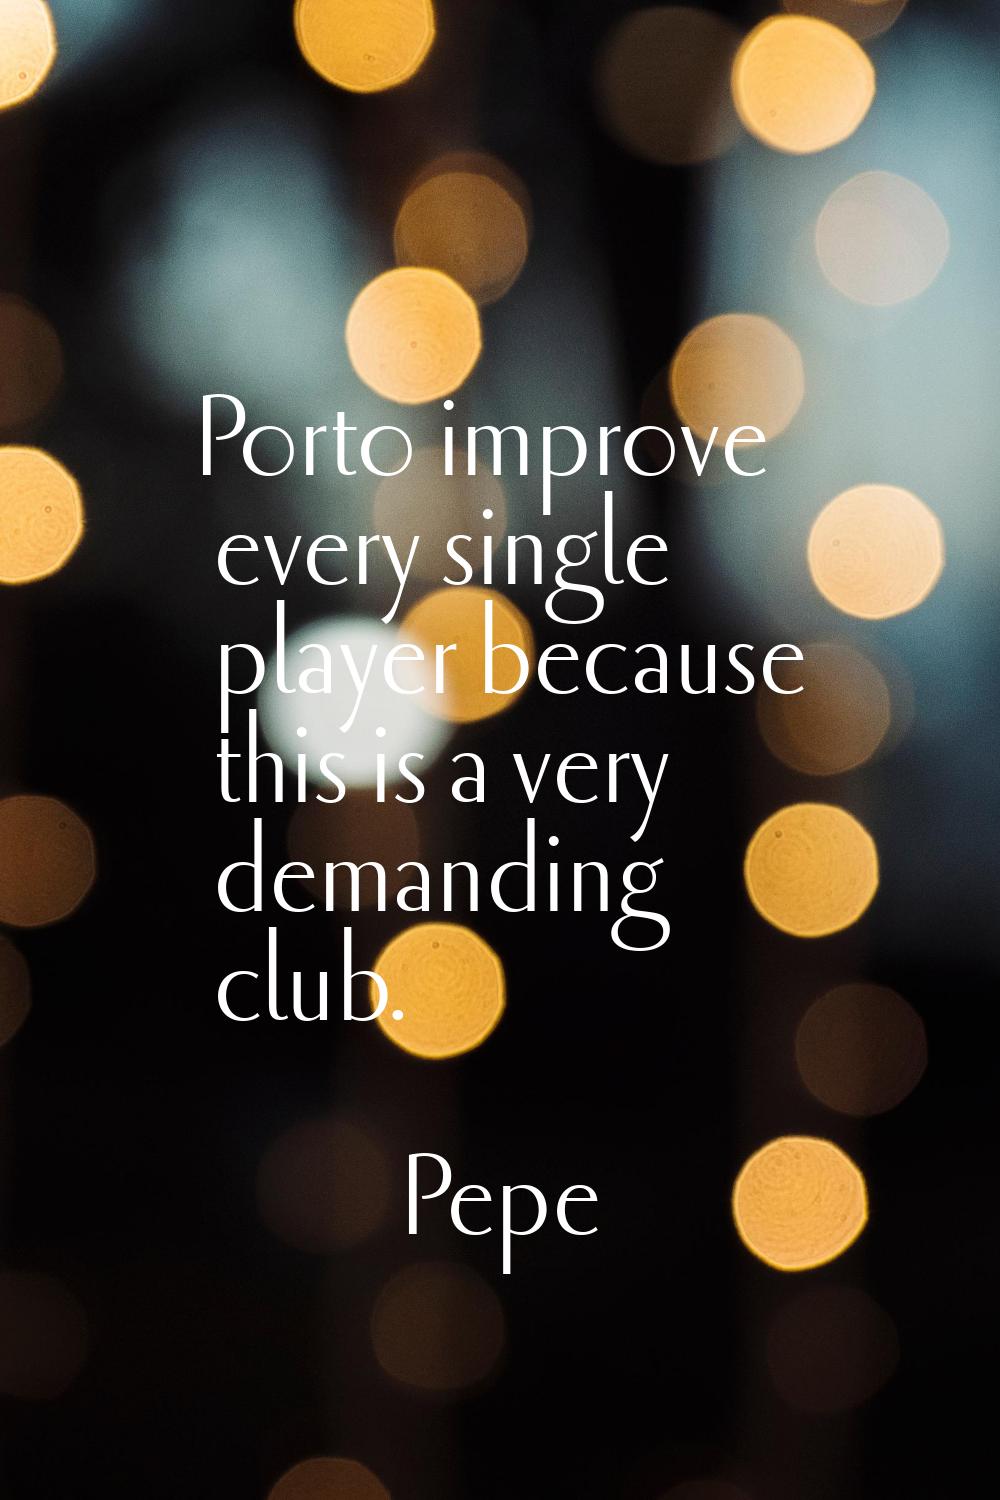 Porto improve every single player because this is a very demanding club.